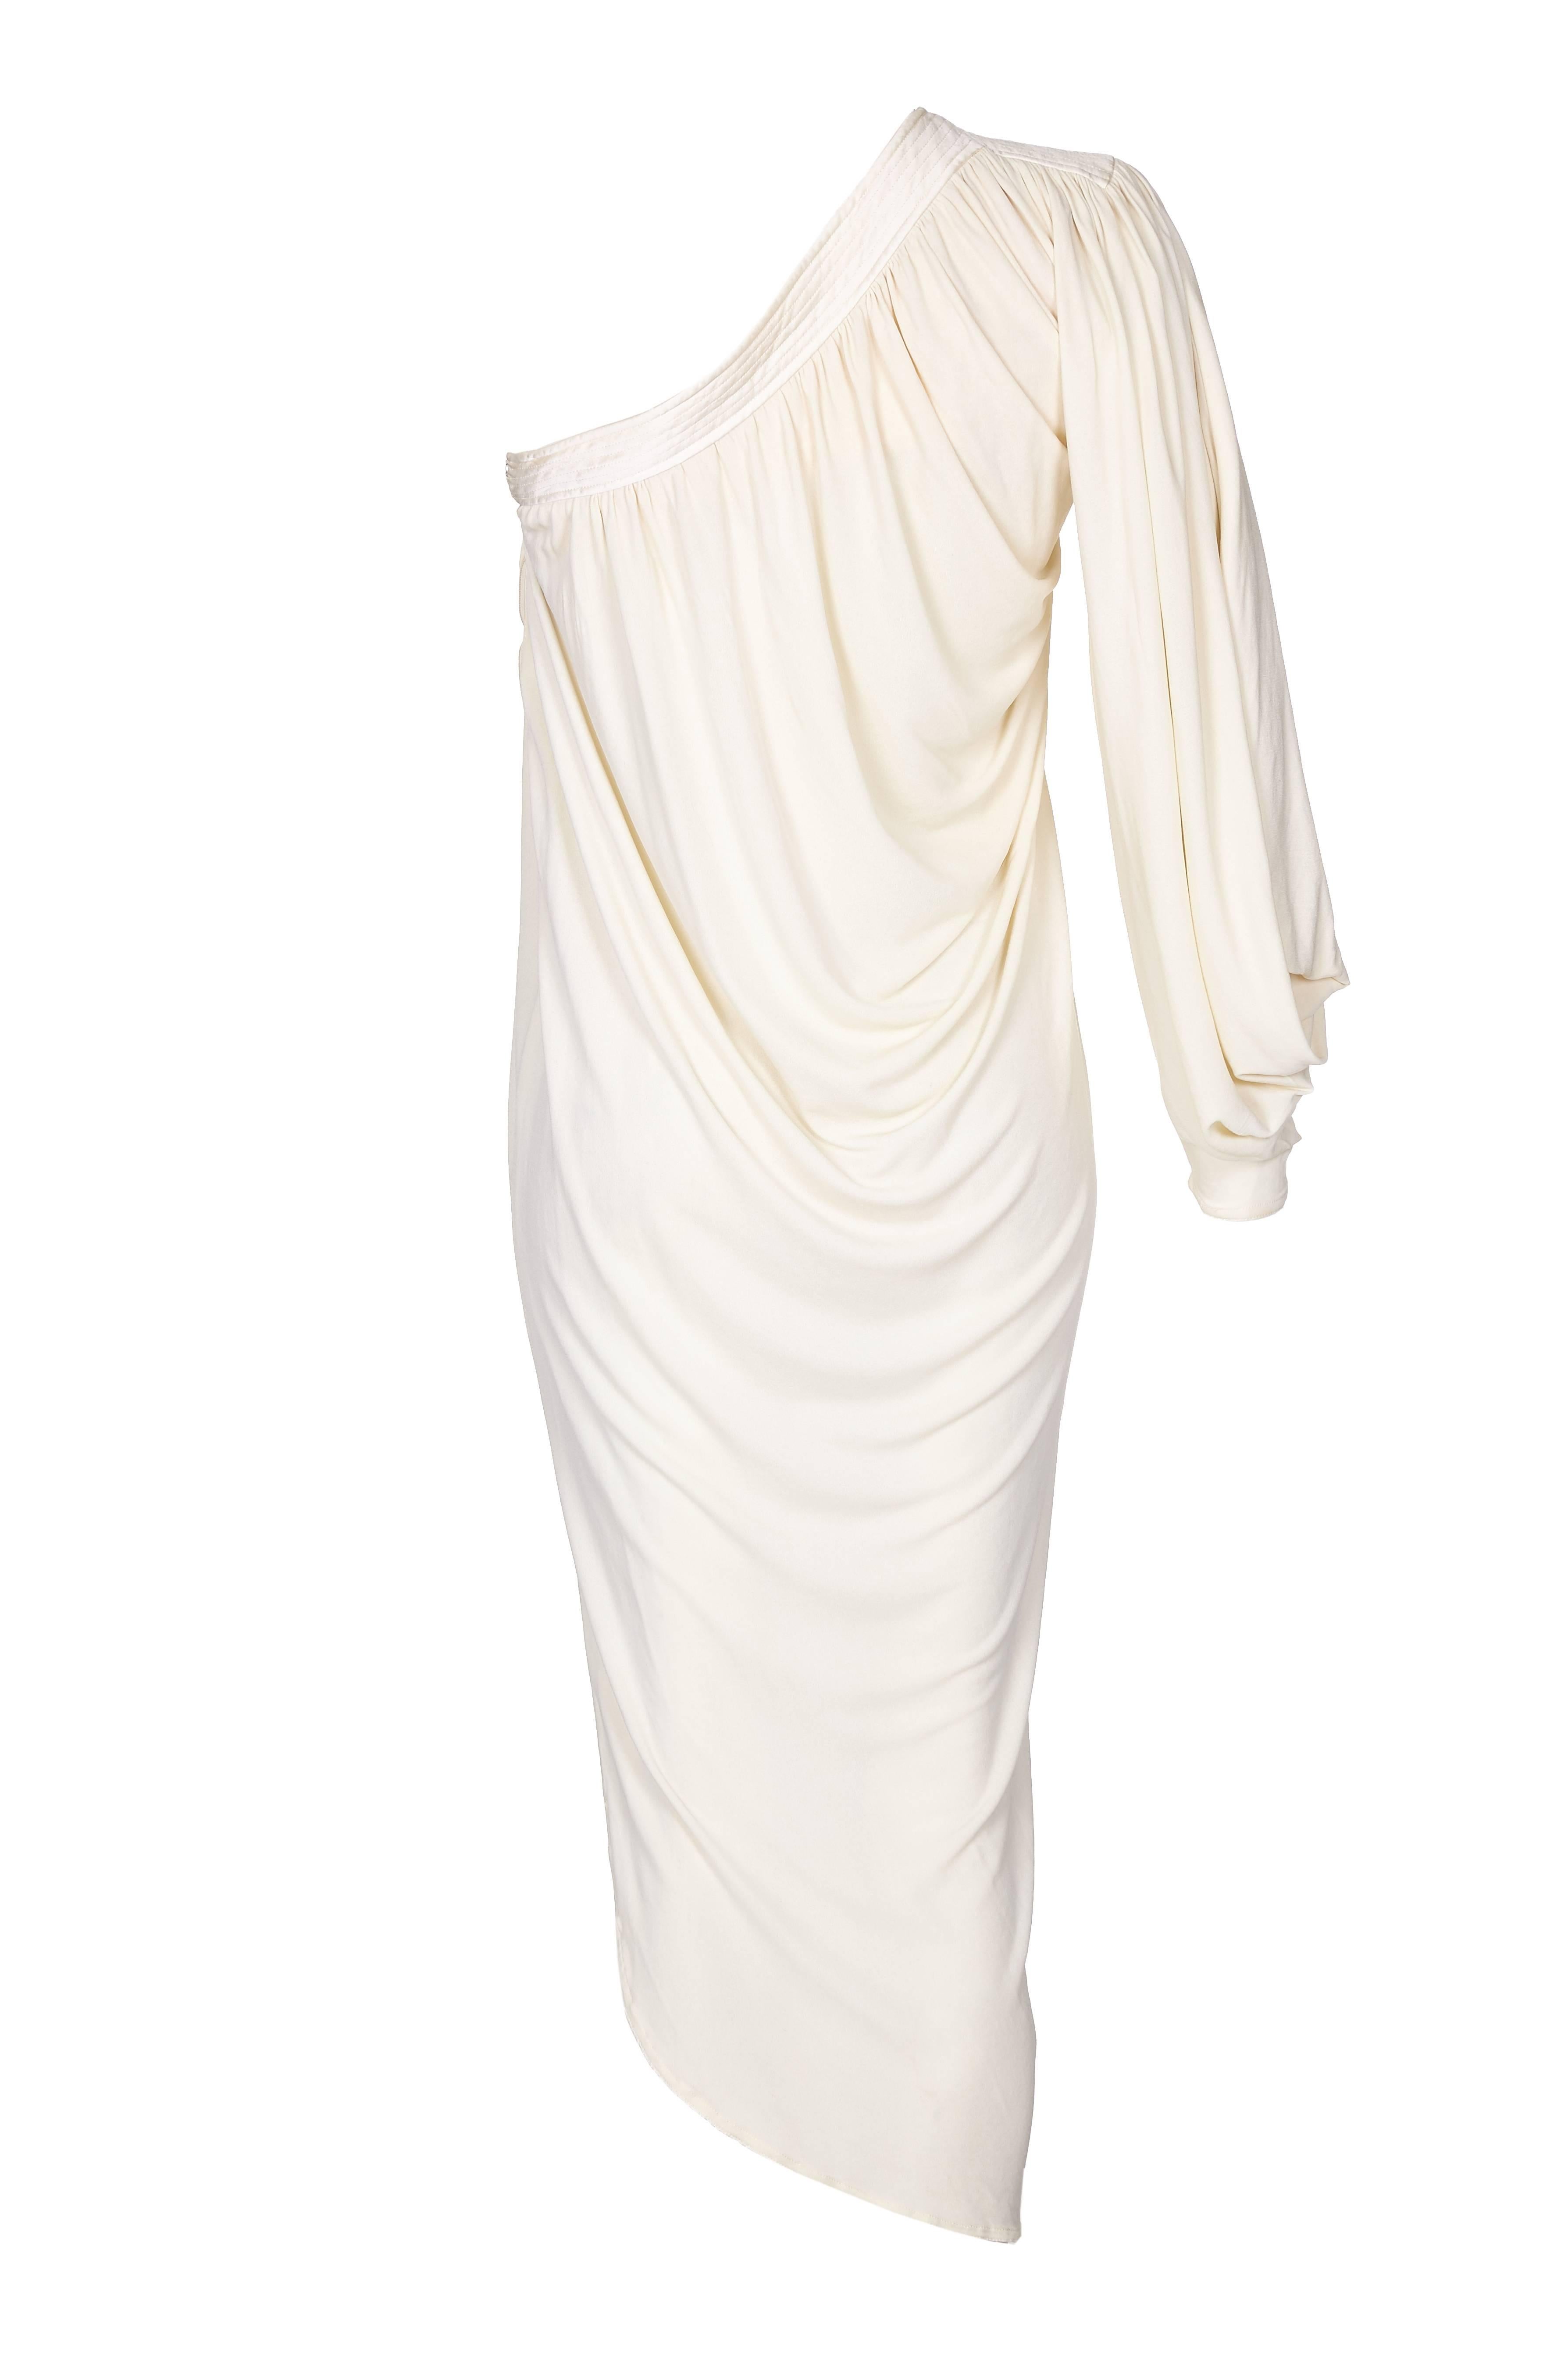 1970s Yuki couture asymmetrical dress in cream silk/jersey. Draped in a Grecian style, this dress is really special and would be perfect for any occasion. This is a piece from his main line collection not his later diffusion line for Rembrandt.